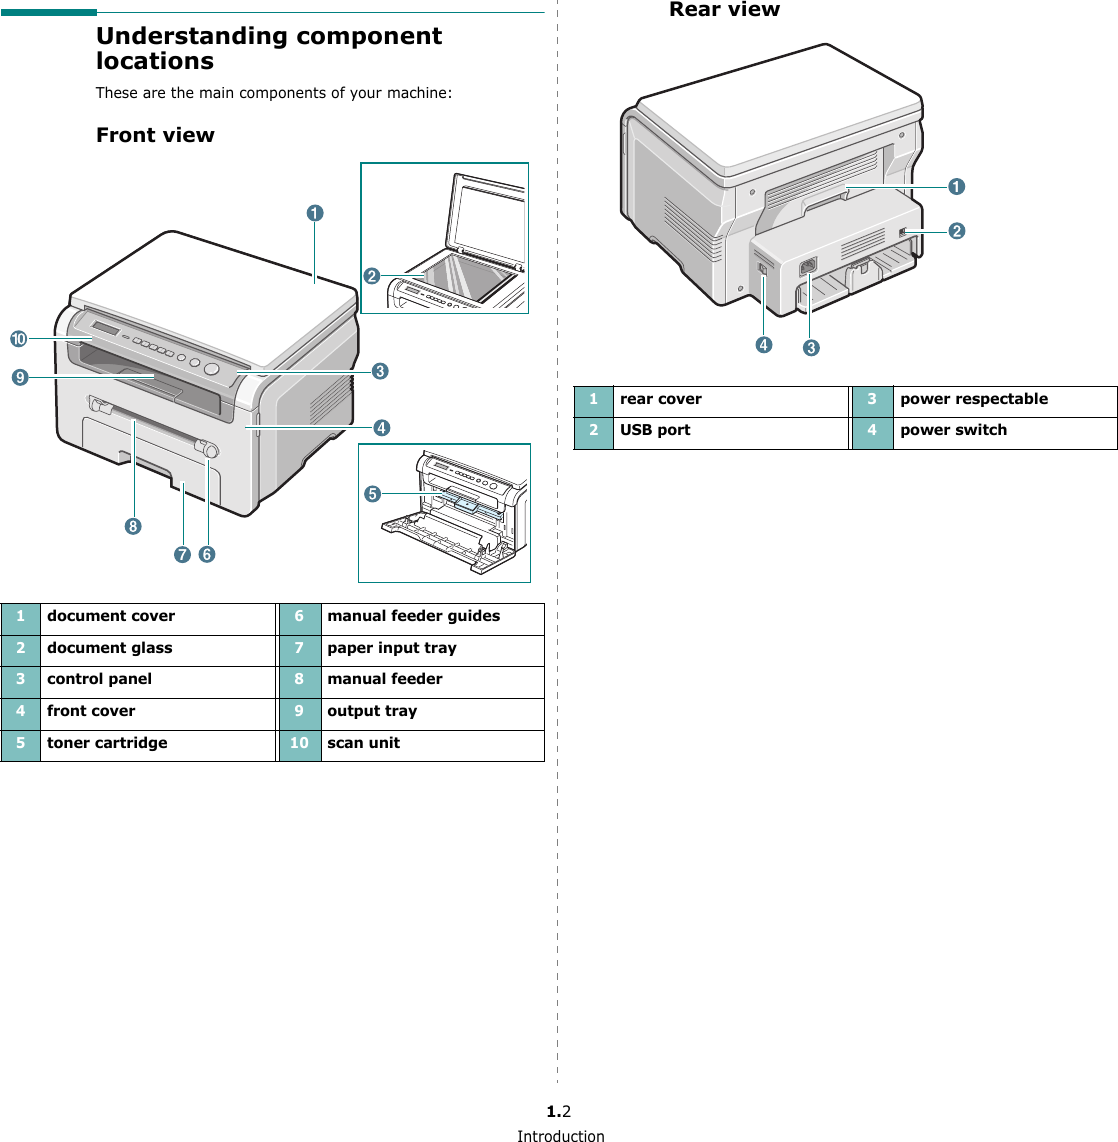 Introduction1.2Understanding component locationsThese are the main components of your machine:Front view1document cover6manual feeder guides2document glass7paper input tray3control panel8manual feeder4front cover9output tray5toner cartridge10scan unitRear view1rear cover3power respectable2USB port4power switch